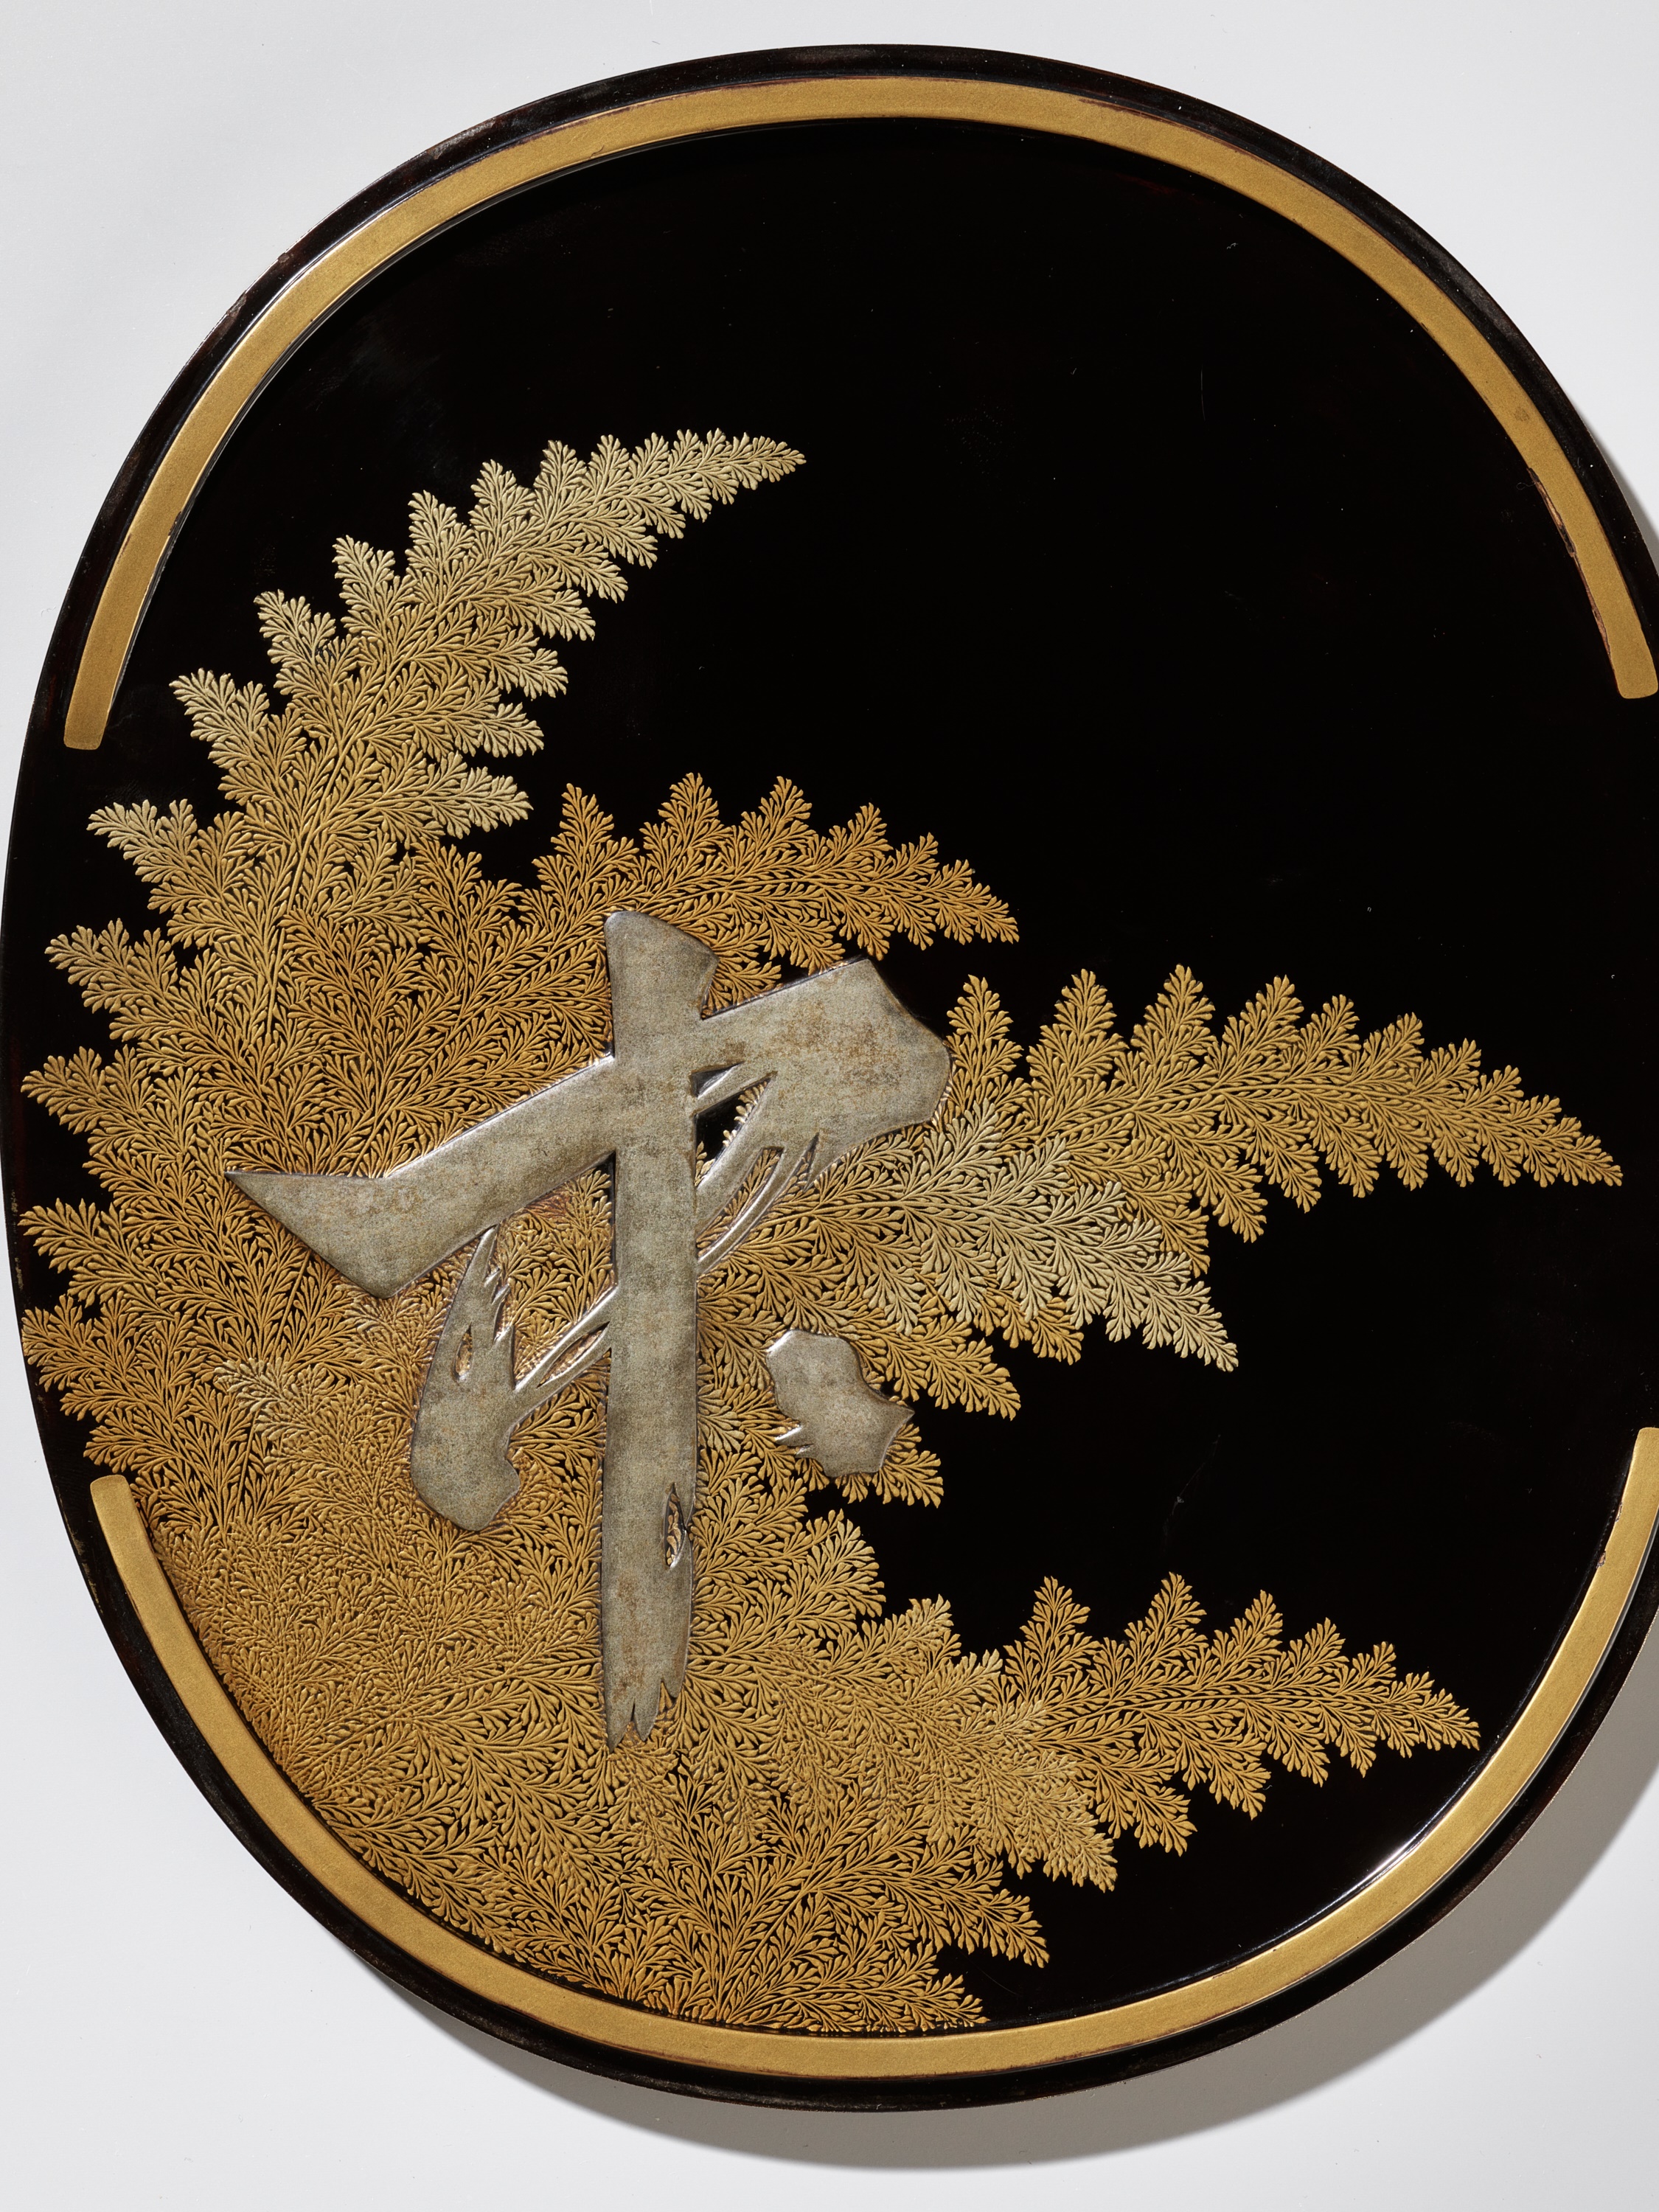 A FINE LACQUER SUZURIBAKO DEPICTING A PAIR OF PIGEONS - Image 2 of 11